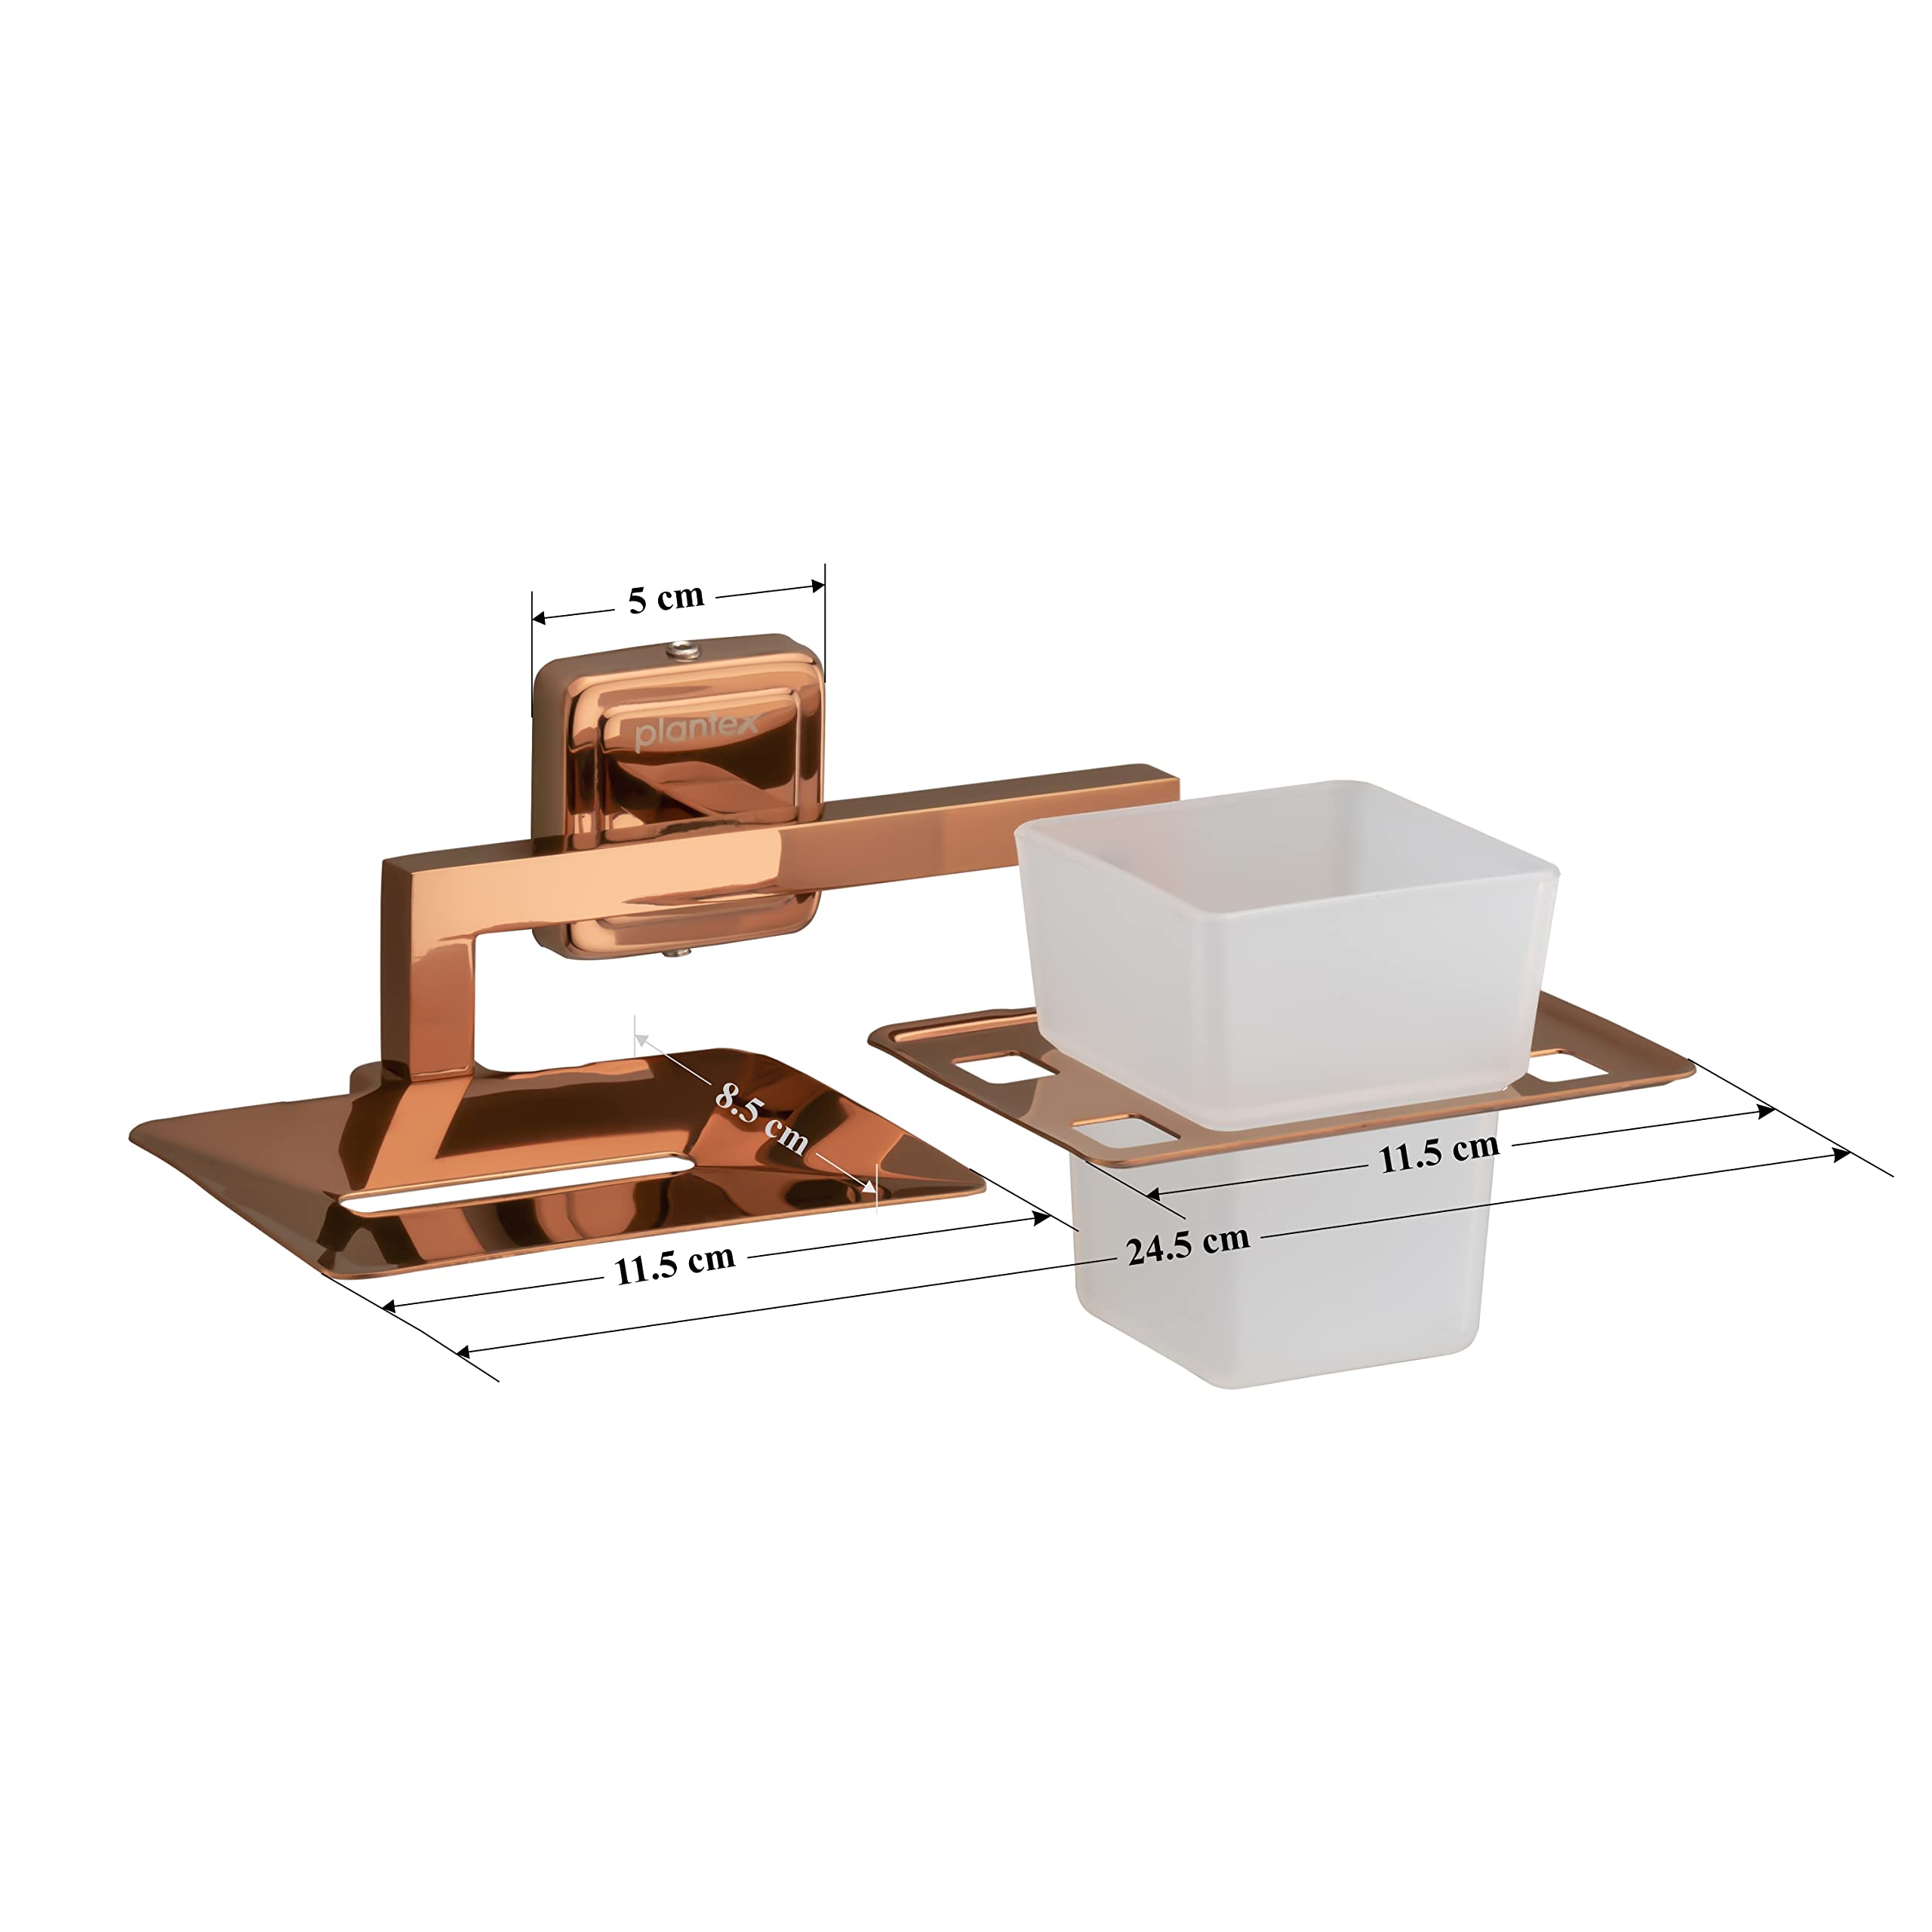 Plantex Stainless Steel 304 Grade Decan 2in1 Soap Dish with Tumbler Holder/Soap Stand/Tooth Brush Holder/Bathroom Accessories Pack of 1 (650 - PVD Rose Gold)